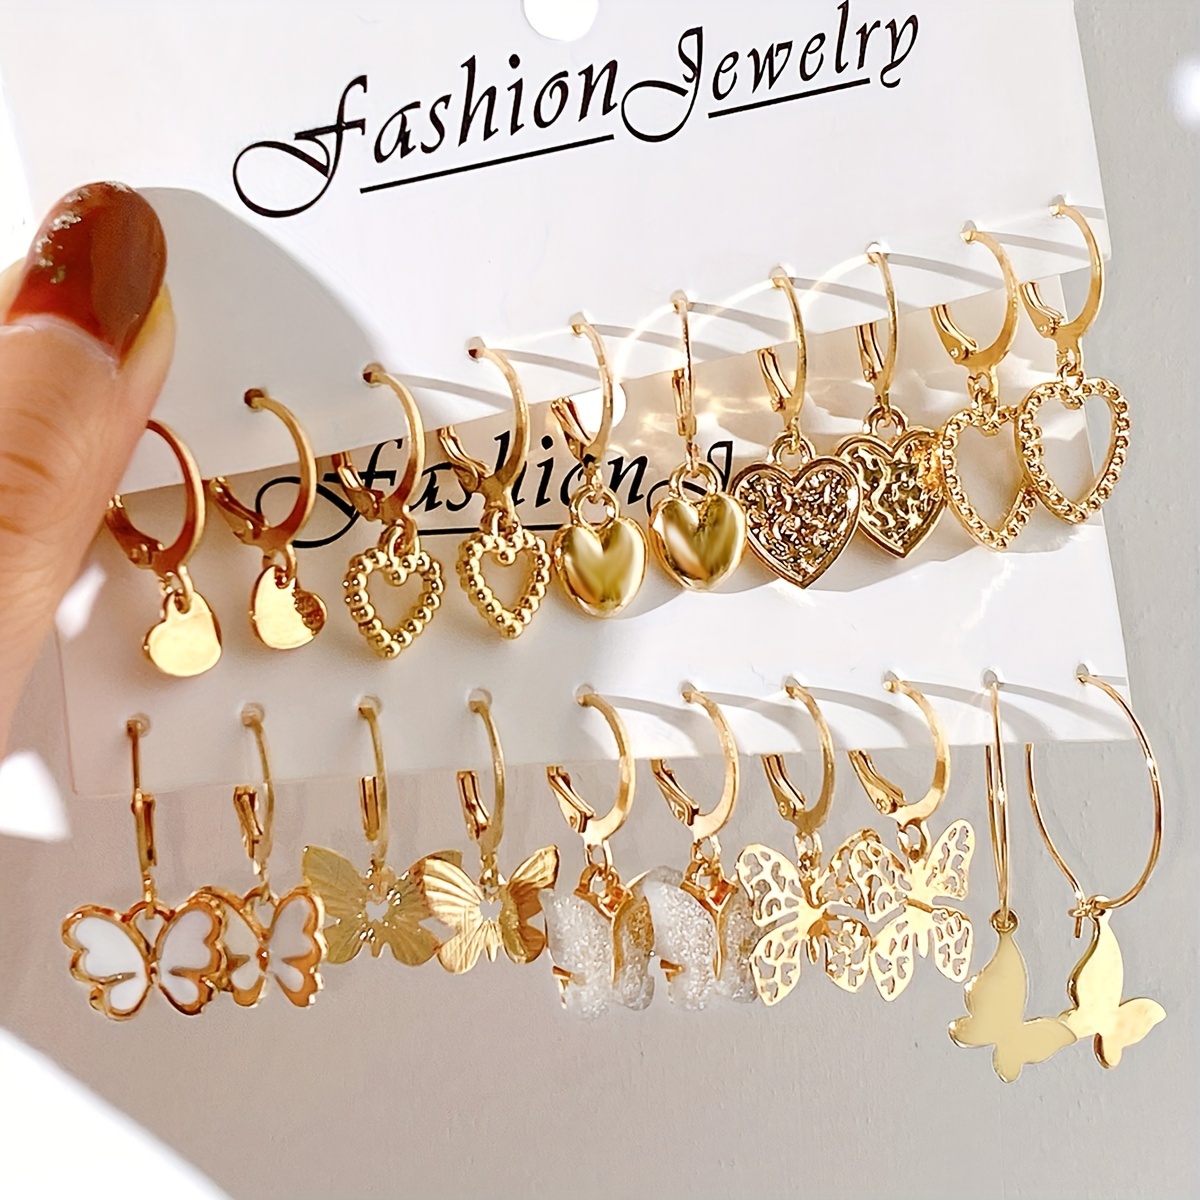 

10 Pairs/ Set Golden & Silvery Earrings Set - Simple Heart & Hollow Butterfly Pendants, Women's Fashion Jewelry For Date, Vacation, Party, Daily Wear Gift